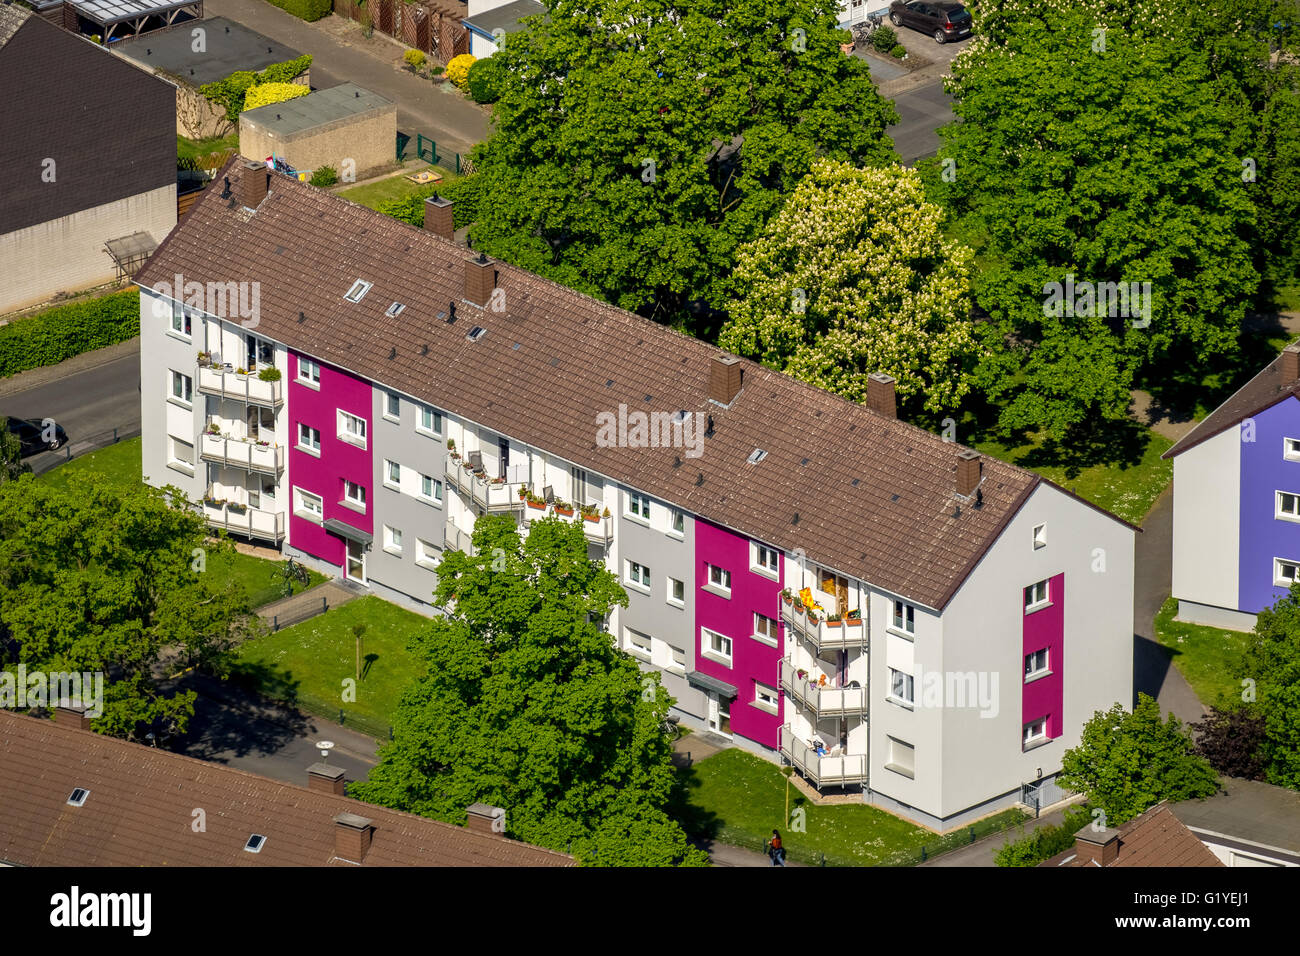 Aerial view, apartment buildings as a participant in a facade competition for rent, apartment buildings, Hamm, Ruhr area,Germany Stock Photo